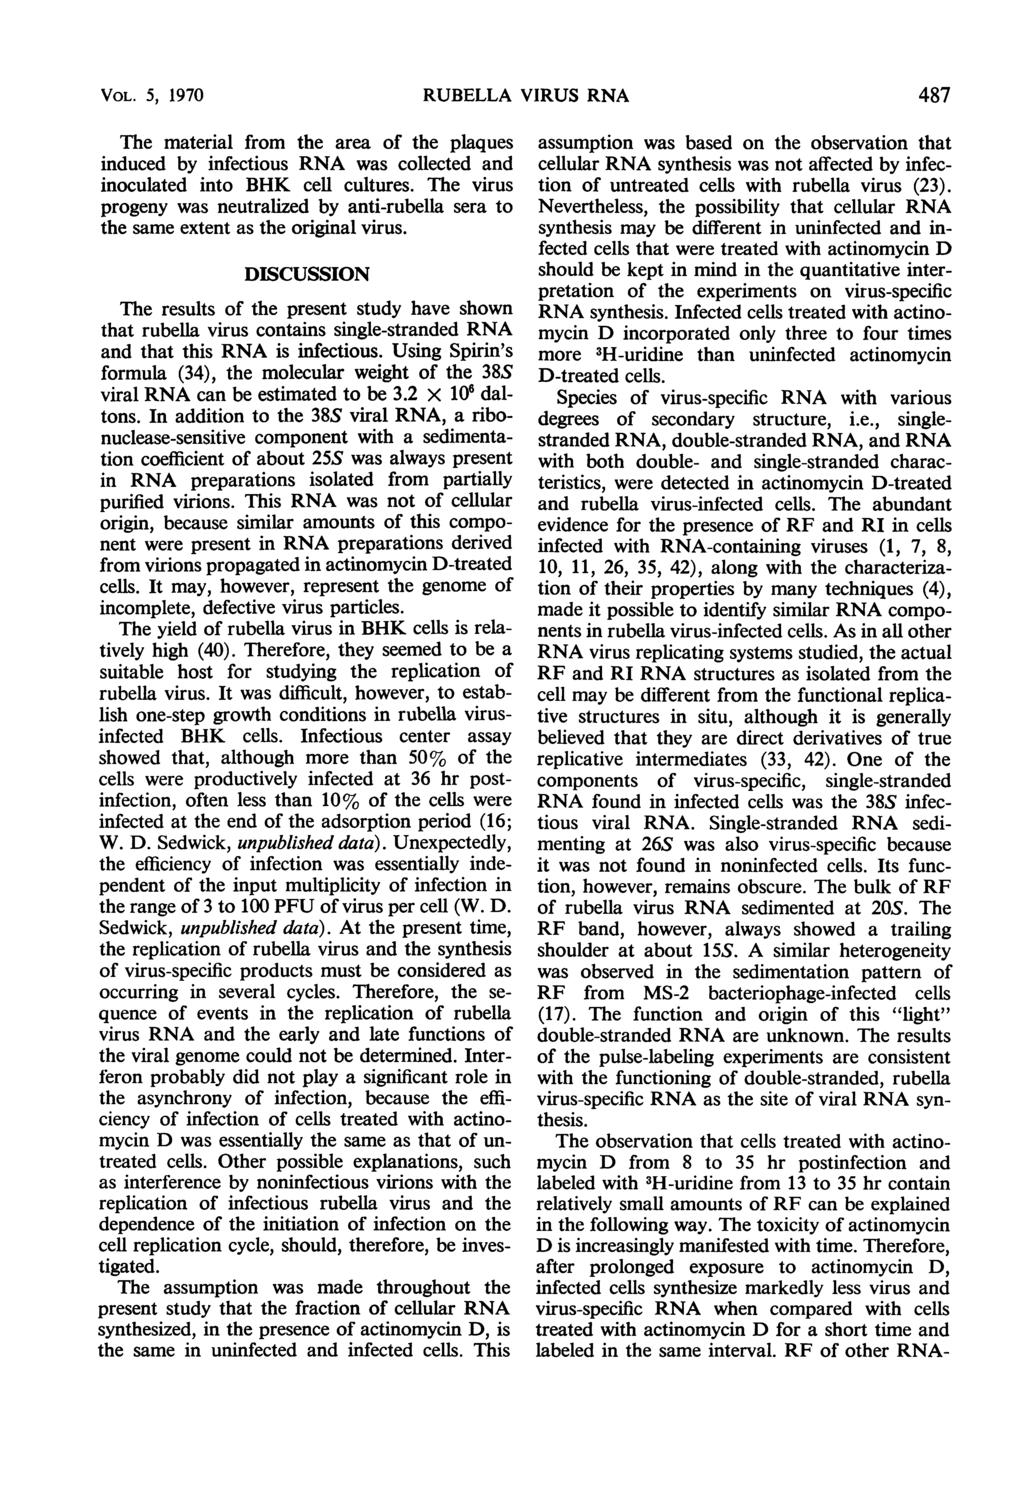 VOL. 5, 197 RUBELLA VIRUS RNA 487 The material from the area of the plaques induced by infectious RNA was collected and inoculated into BHK cell cultures.